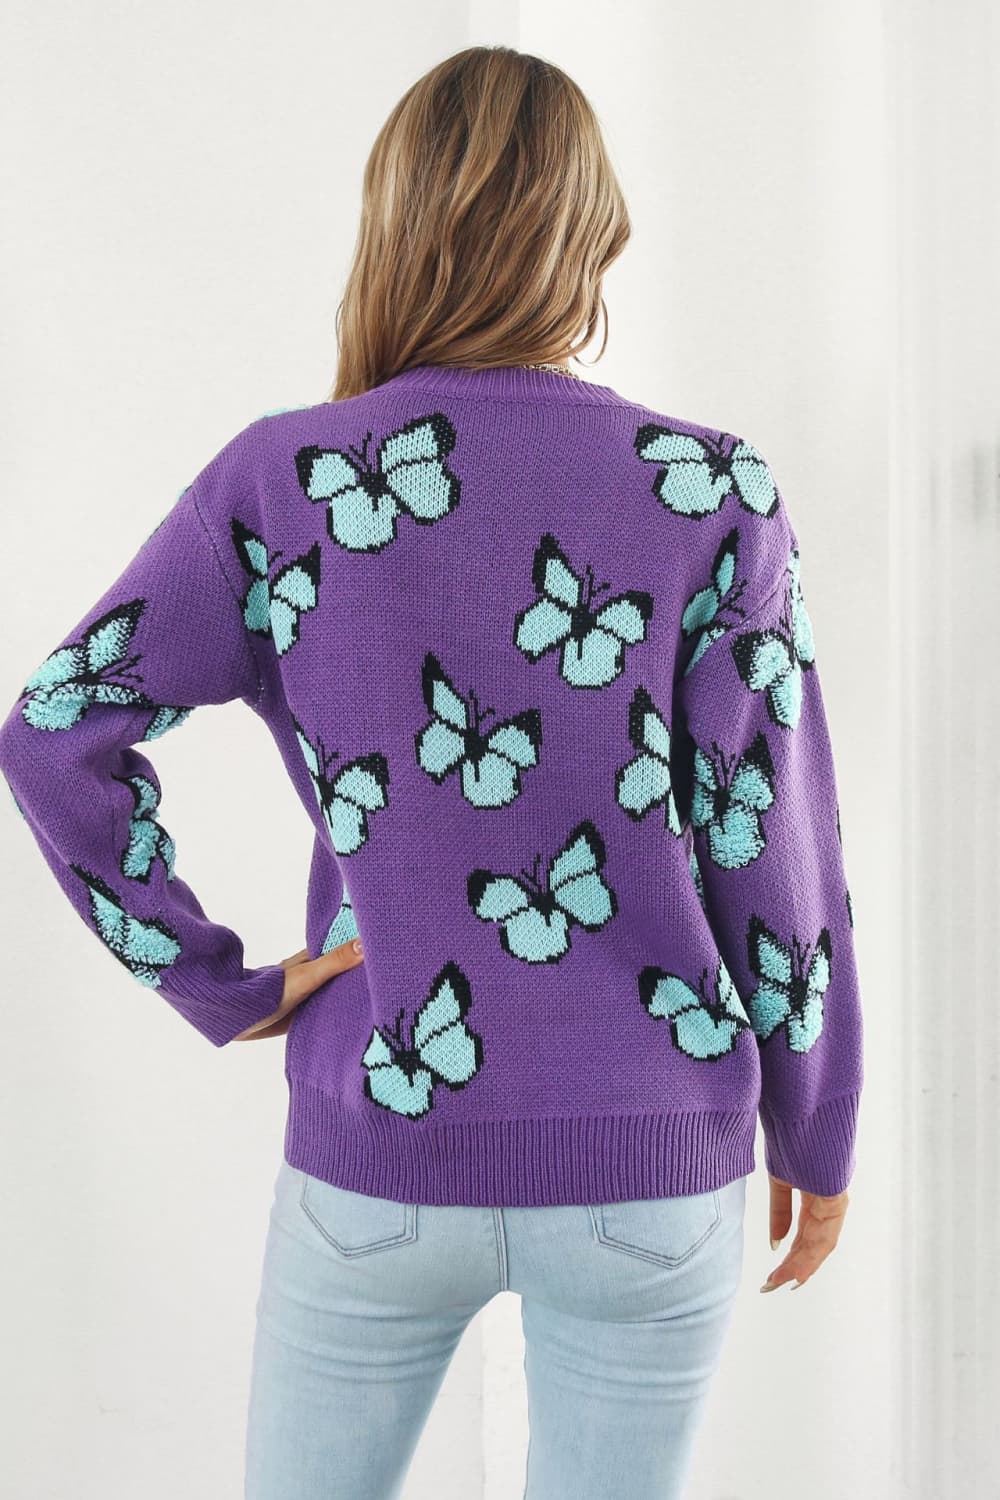 TrendiStyles Butterfly Pattern Round Neck Dropped Shoulder Sweater 🦋